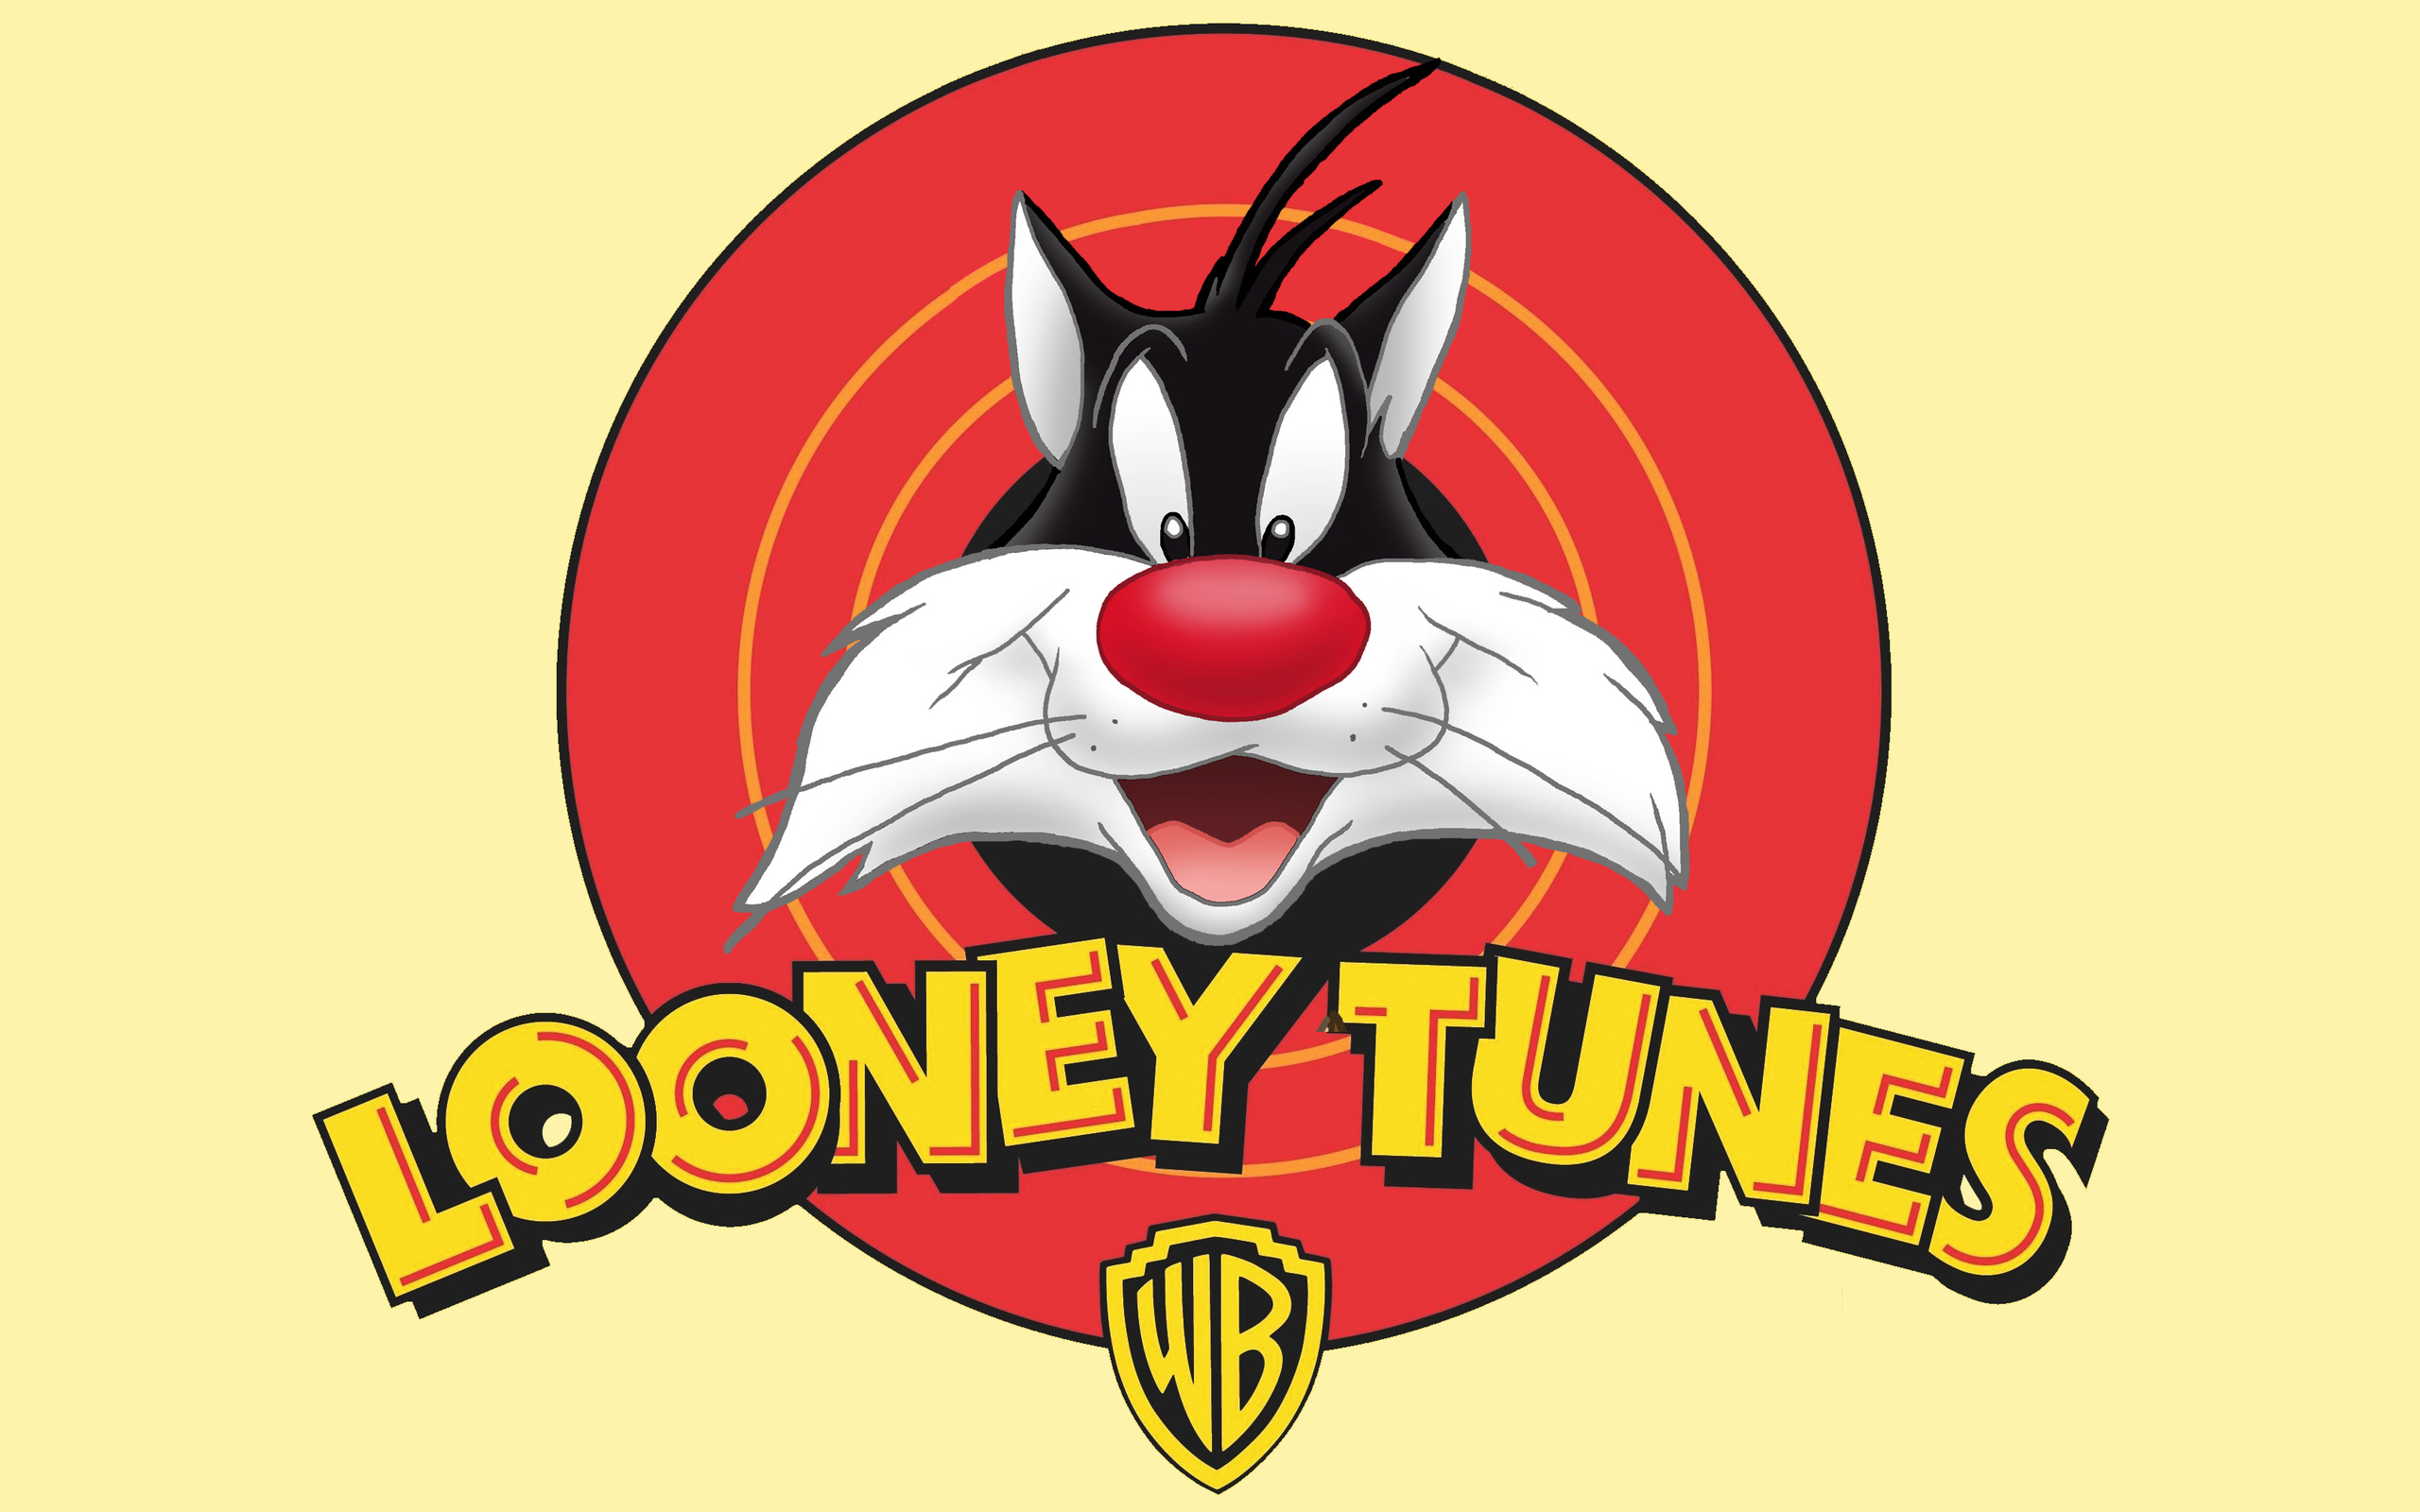 Looney Tunes Widescreen   Wallpaper High Definition High Quality 2560x1600